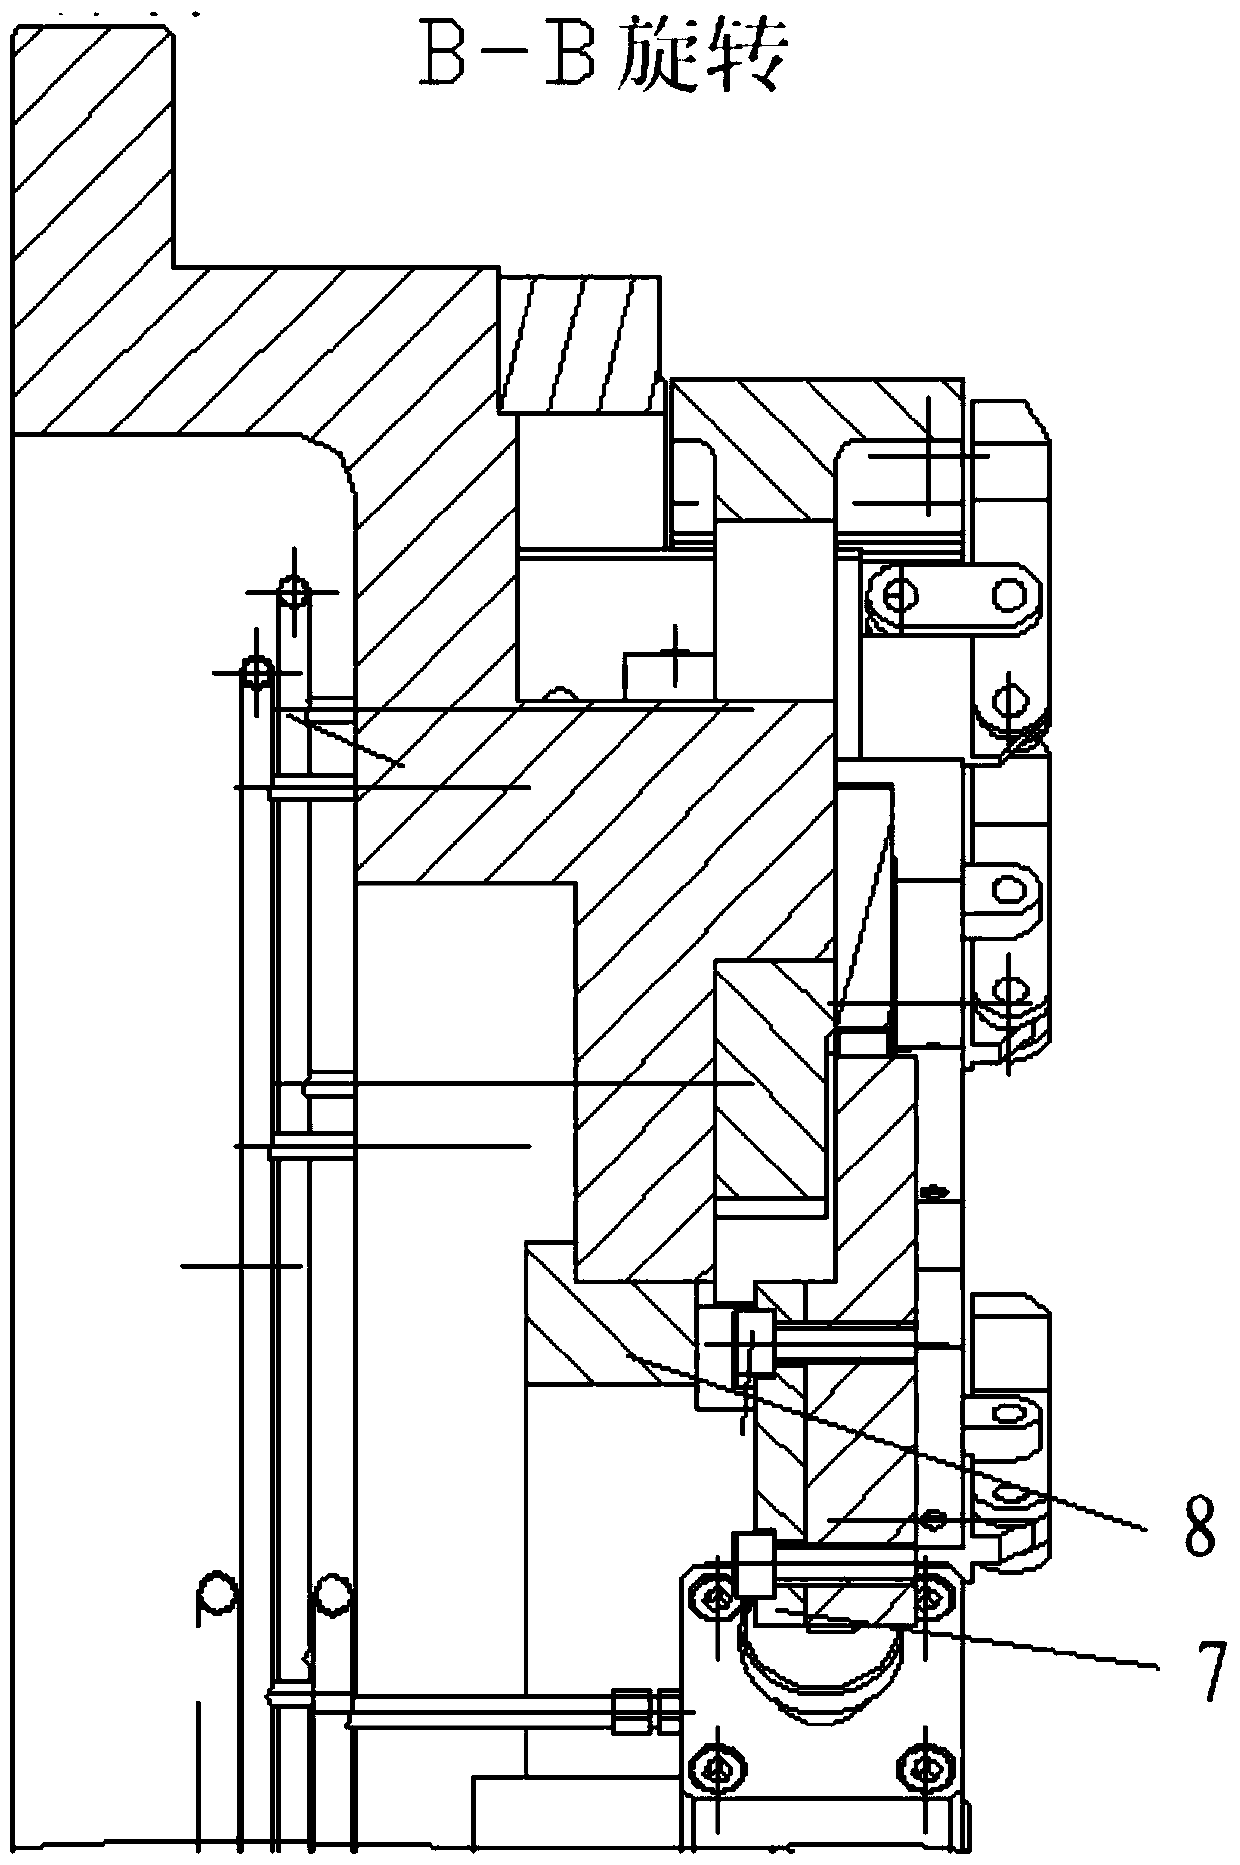 A hydraulically controlled gear transmission fixture